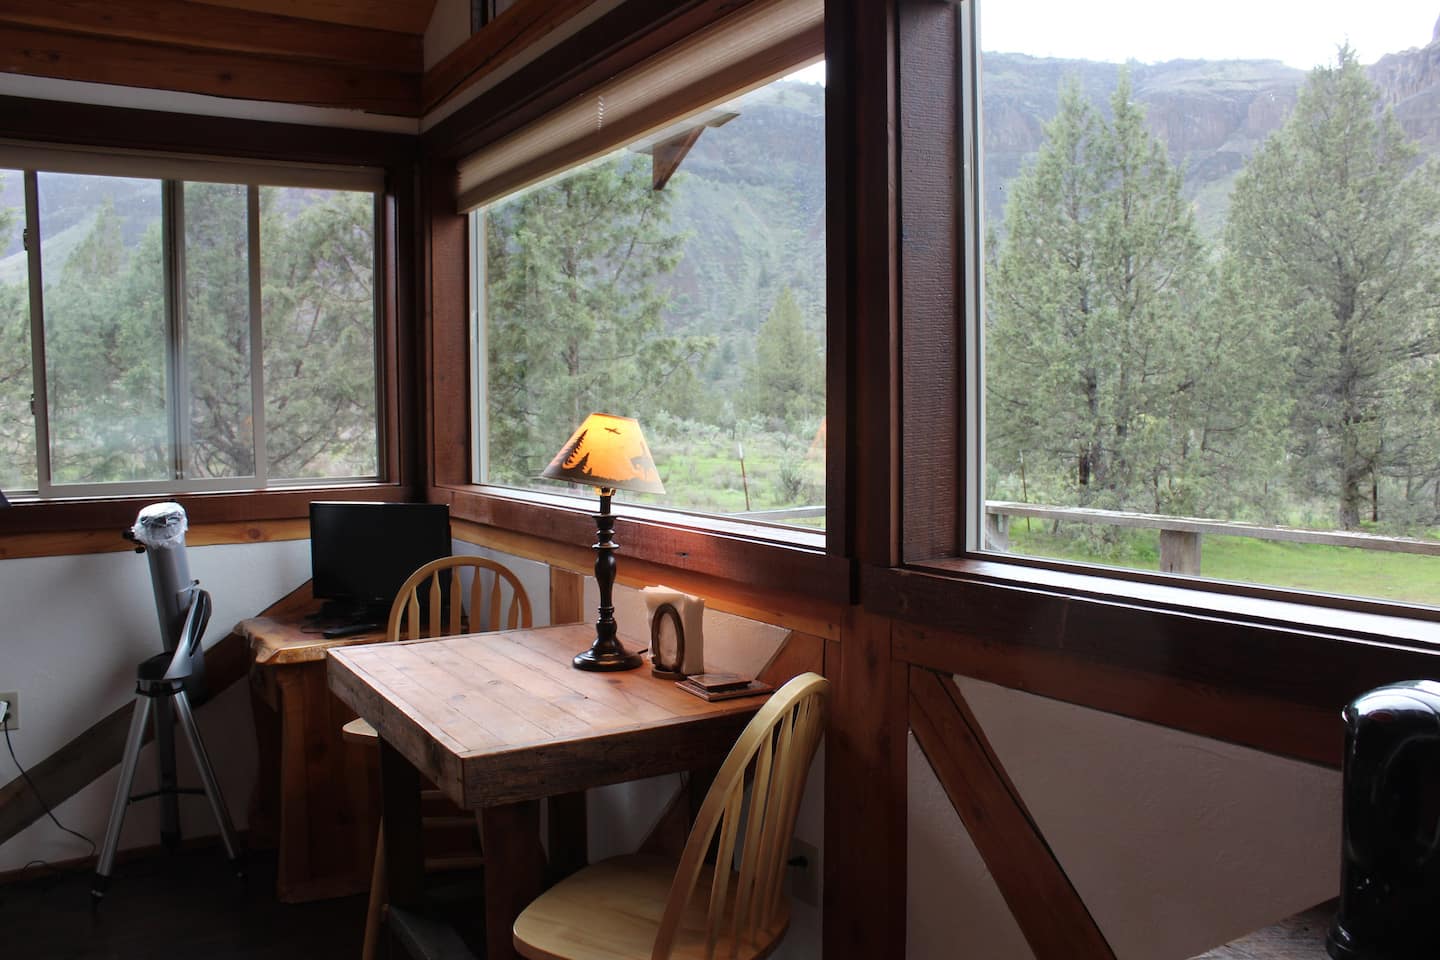 A table inside a cabin in front of a window with a view of trees